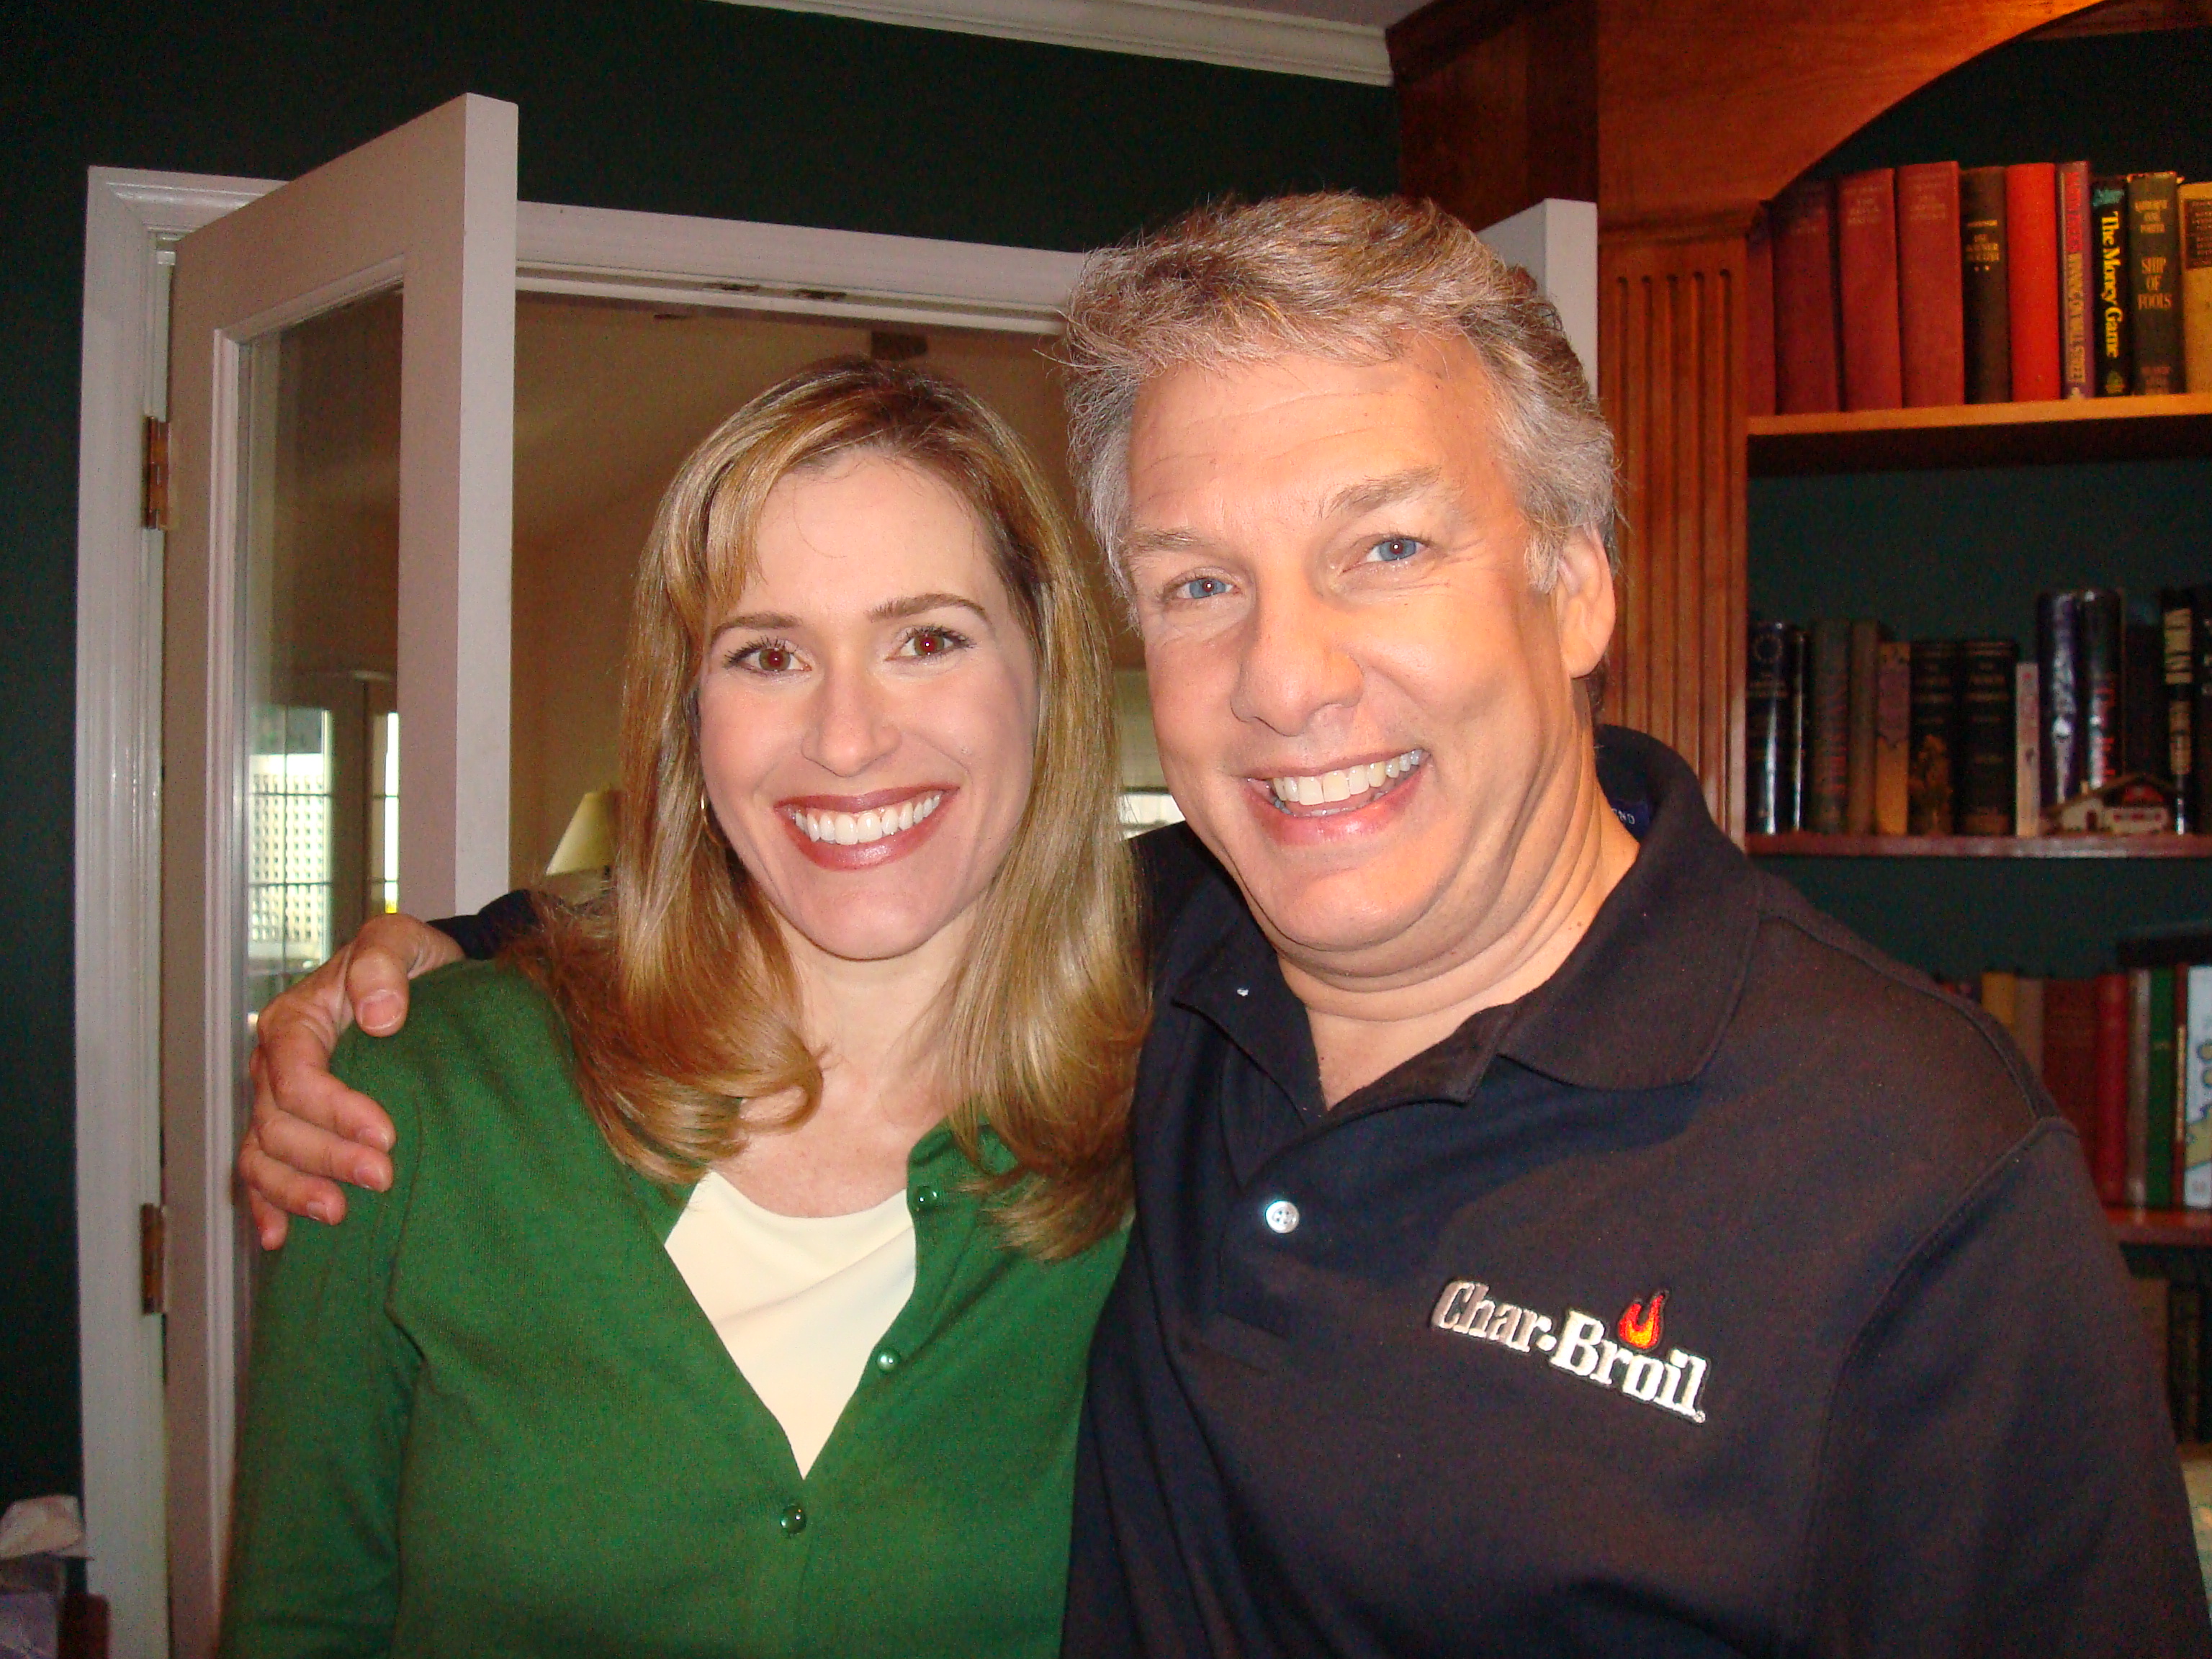 Commercial shoot with Marc Summers in 2008